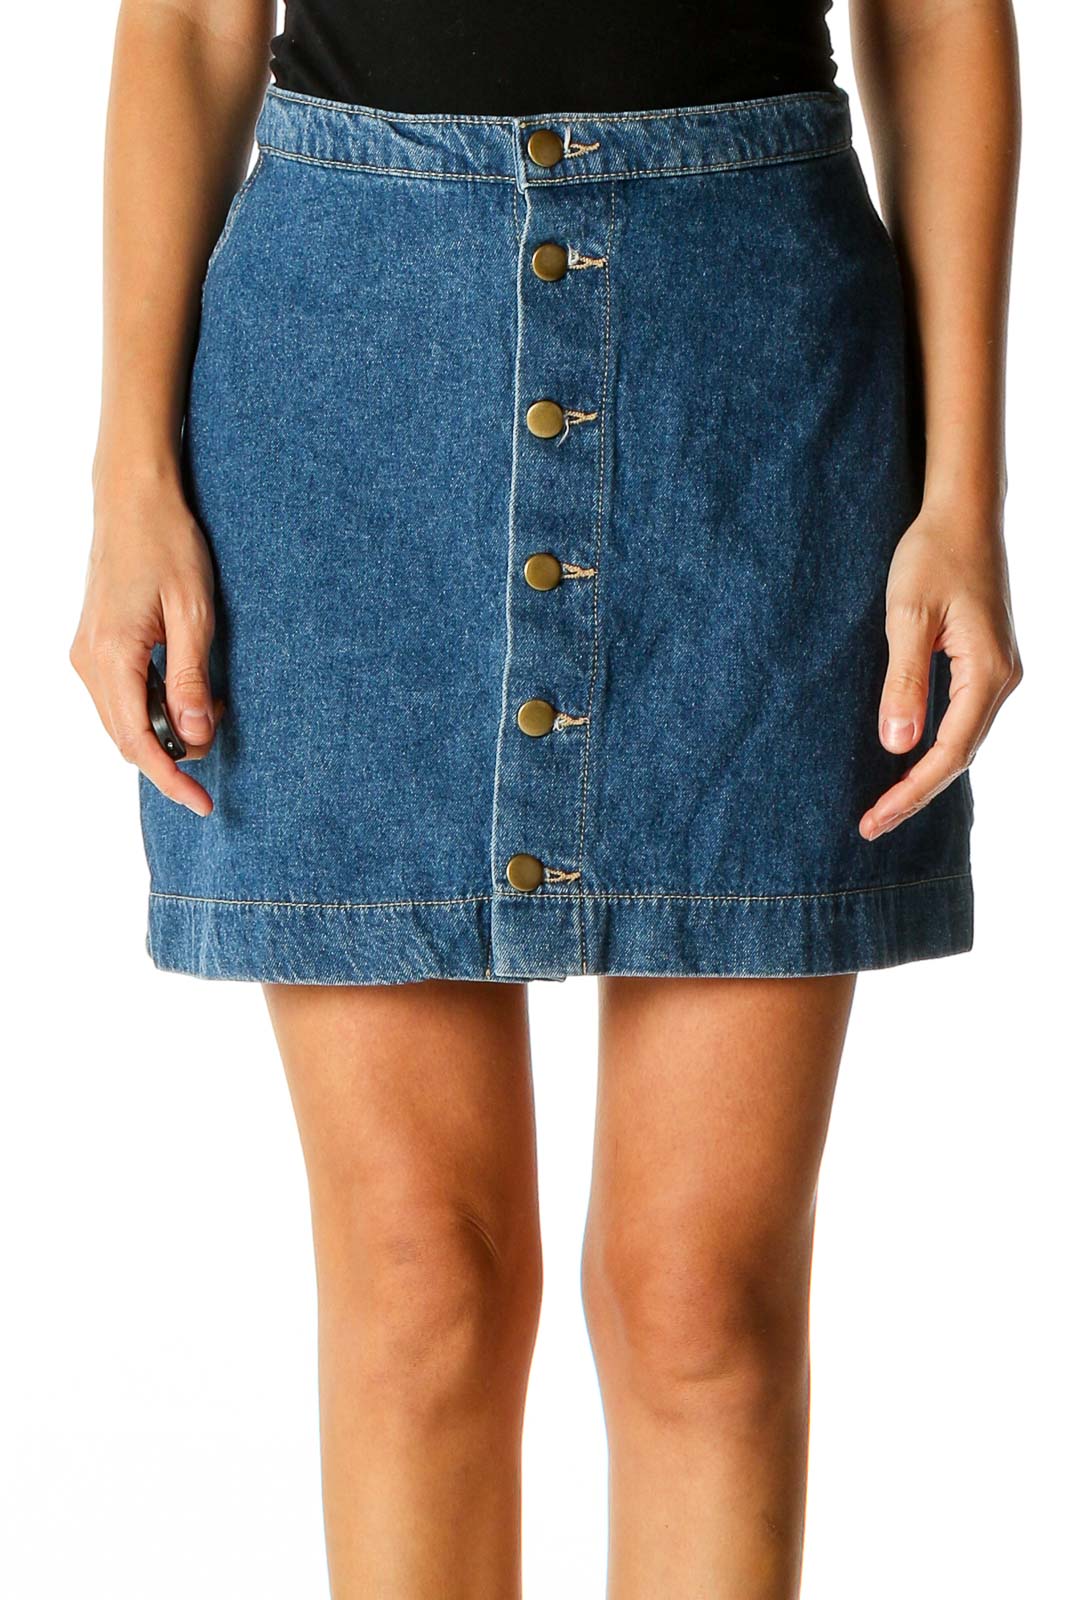 Blue Textured Chic A-Line Skirt Front